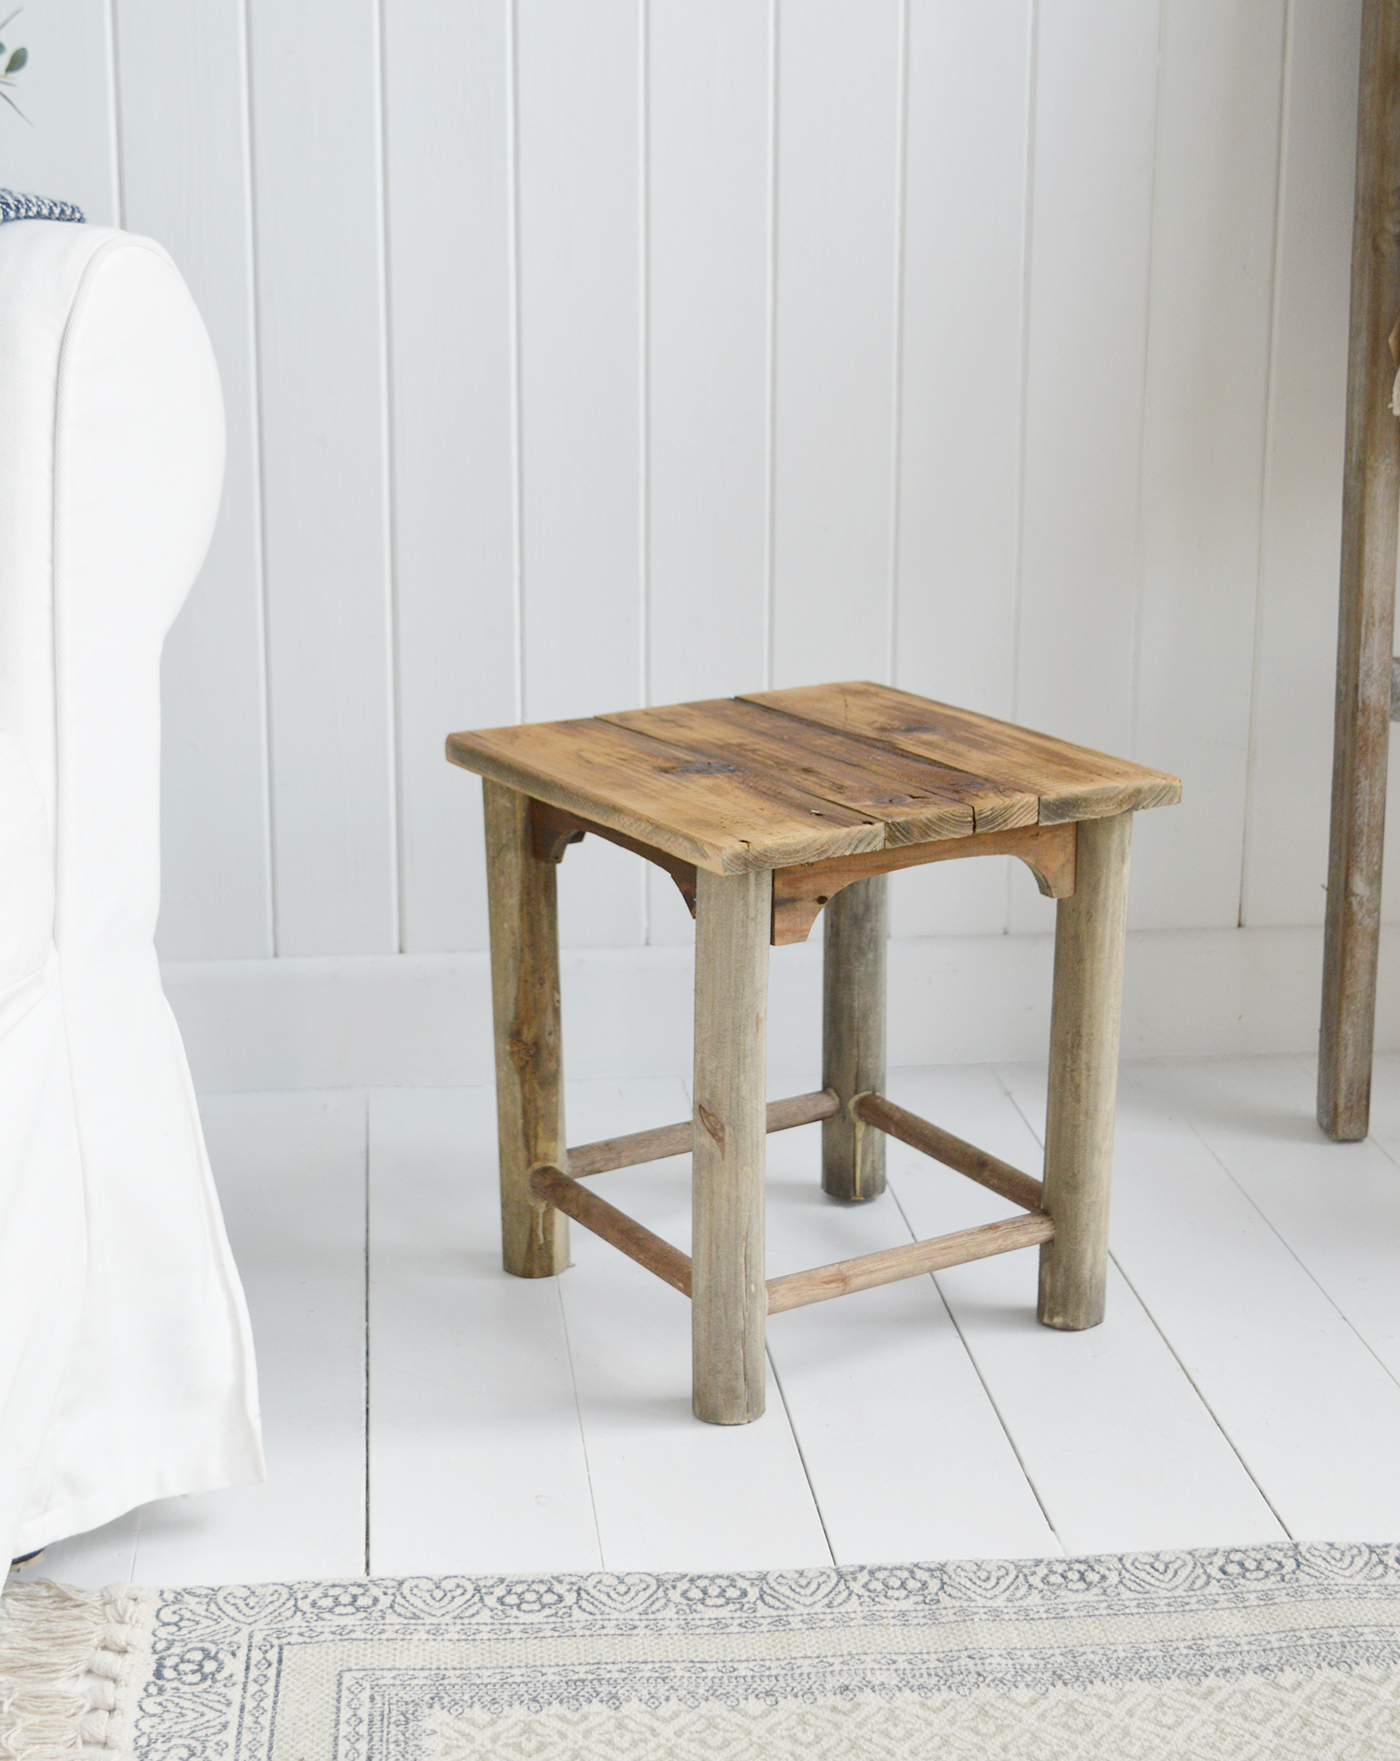 Pawtucket Grey Square Wooden Stool Side Table - Coastal, Country Famrhouse Furniture